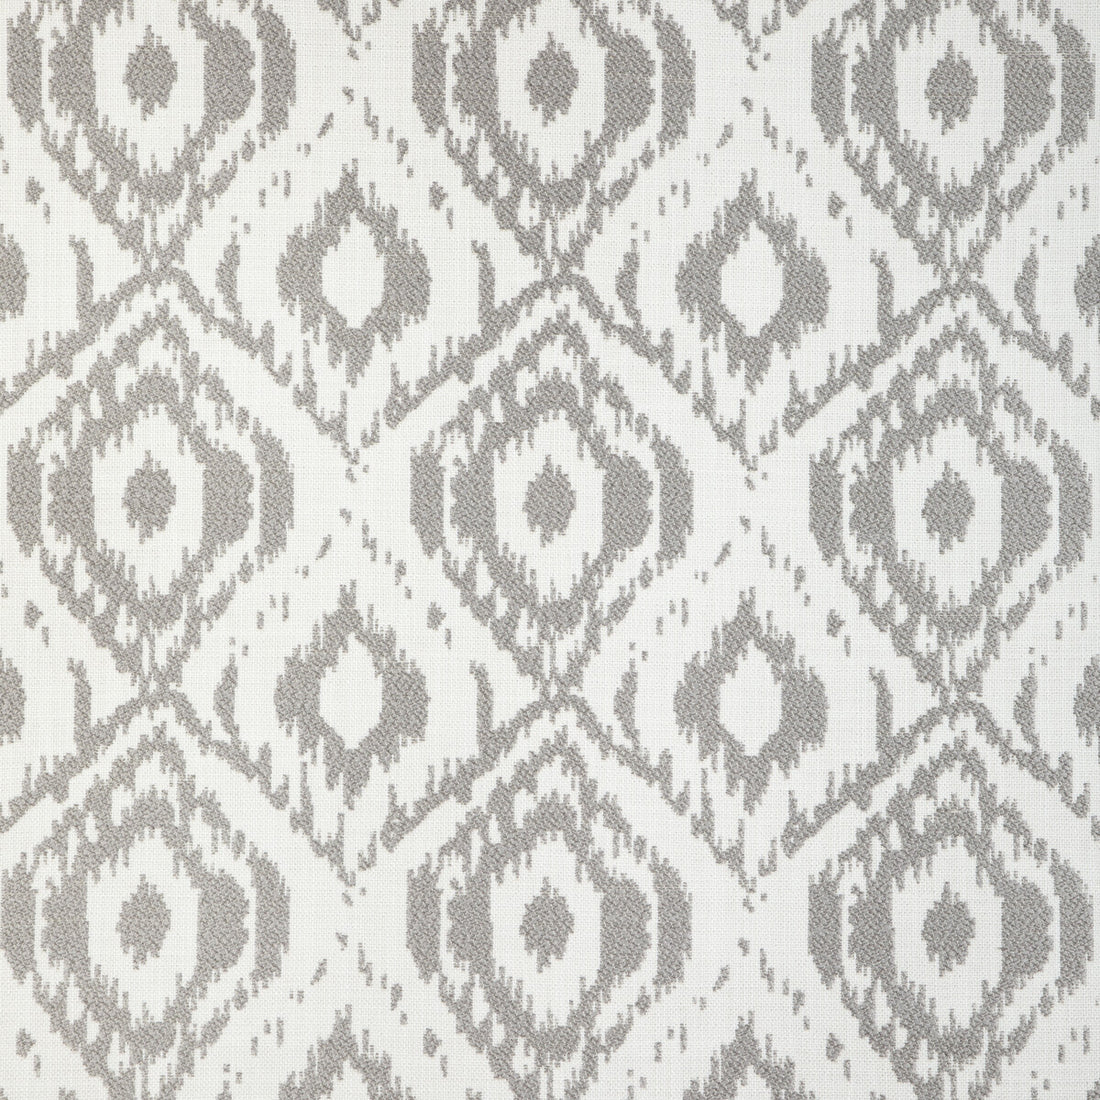 Milos Damask fabric in charcoal color - pattern 36921.11.0 - by Kravet Couture in the Riviera collection